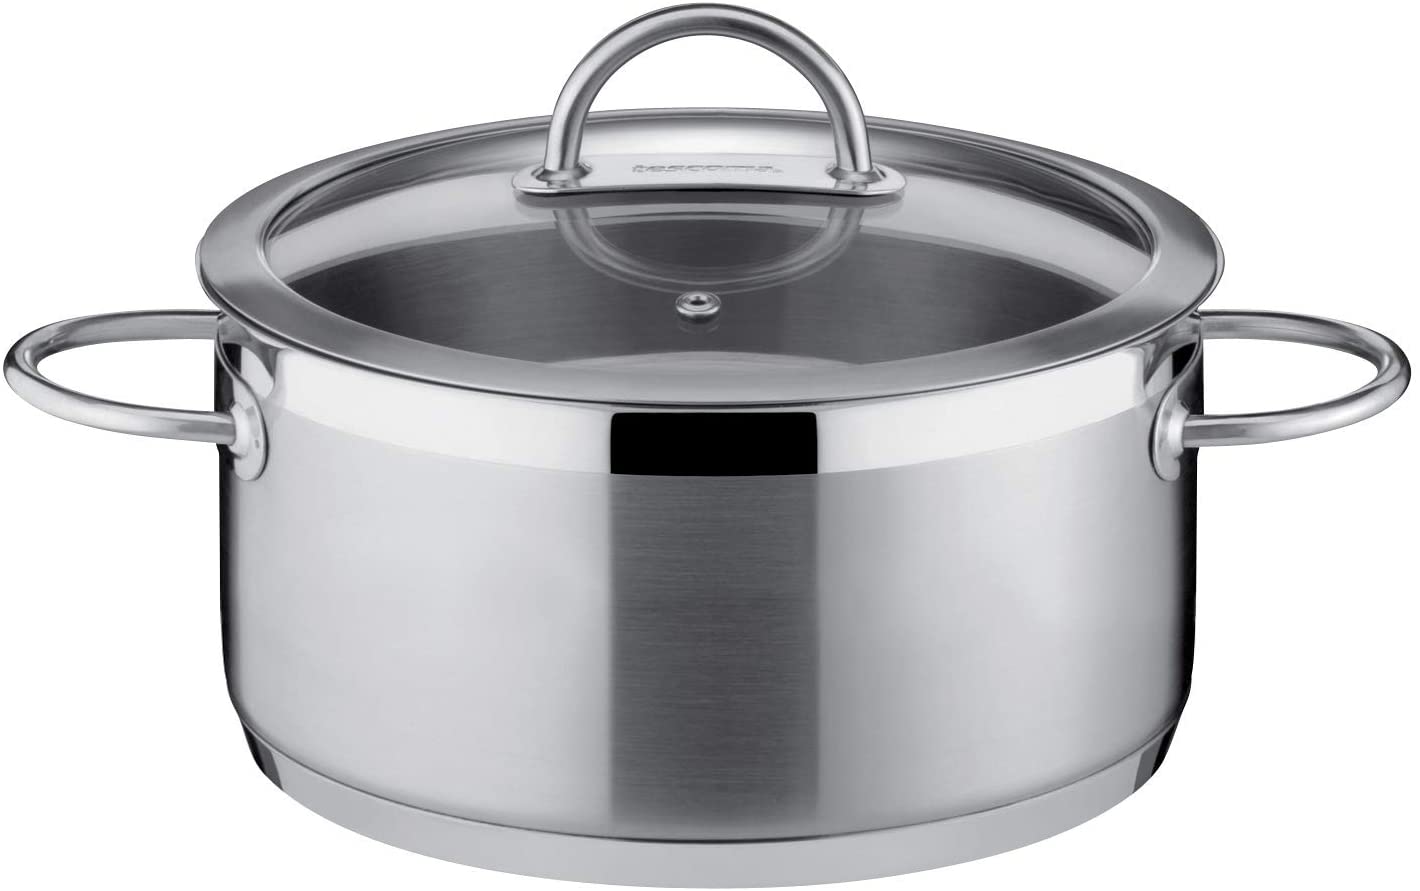 Tescoma Vision 16 cm/ 1.5 Litre Casserole with Cover